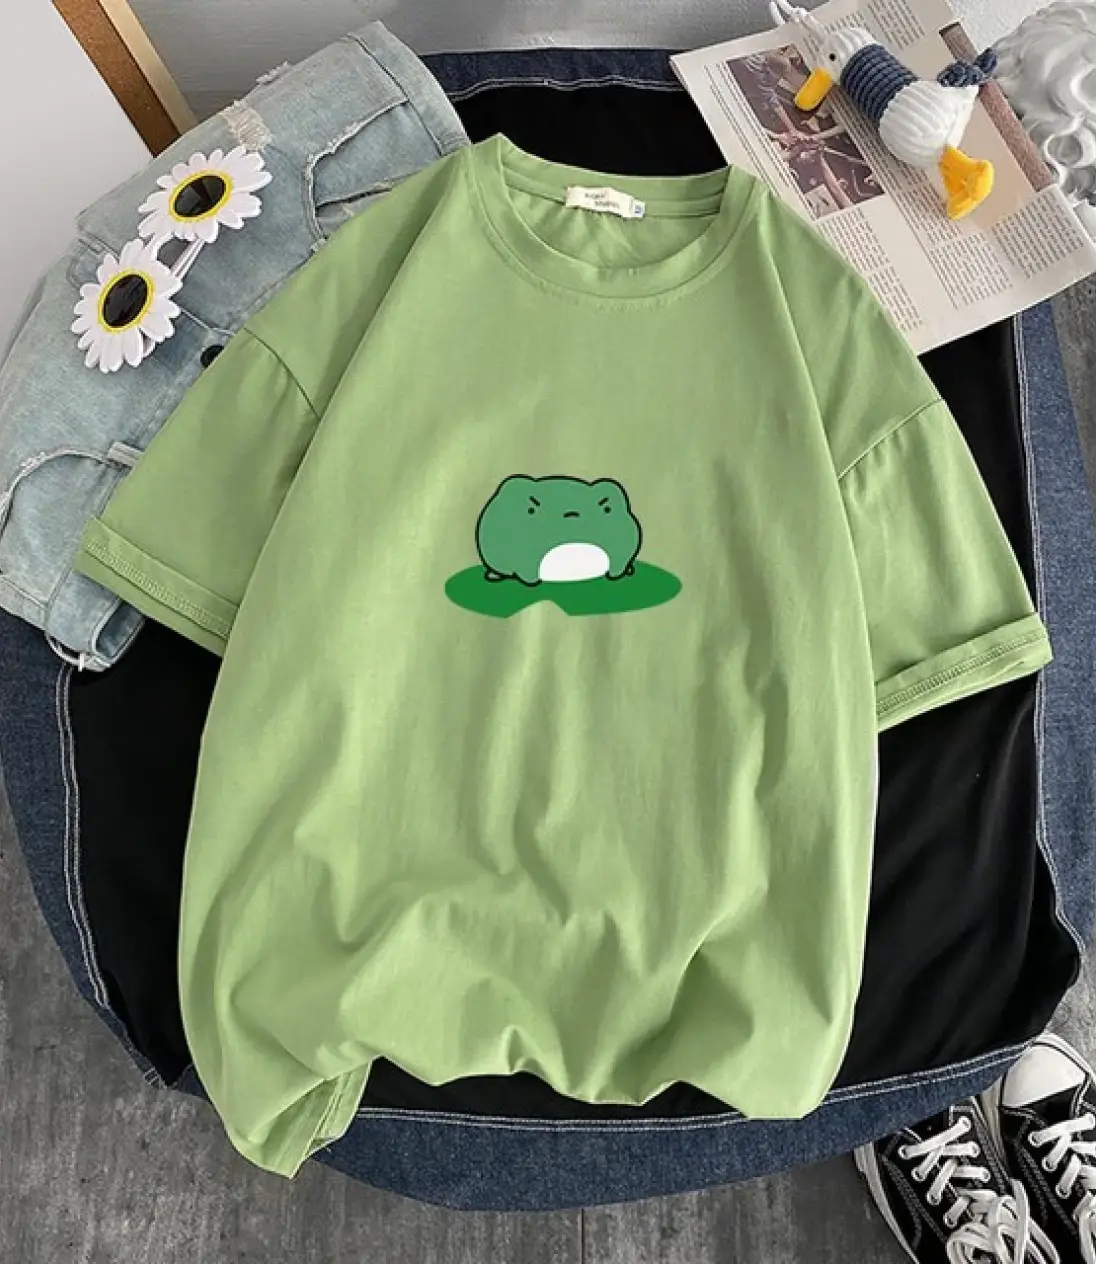 Green tshirt with frog print